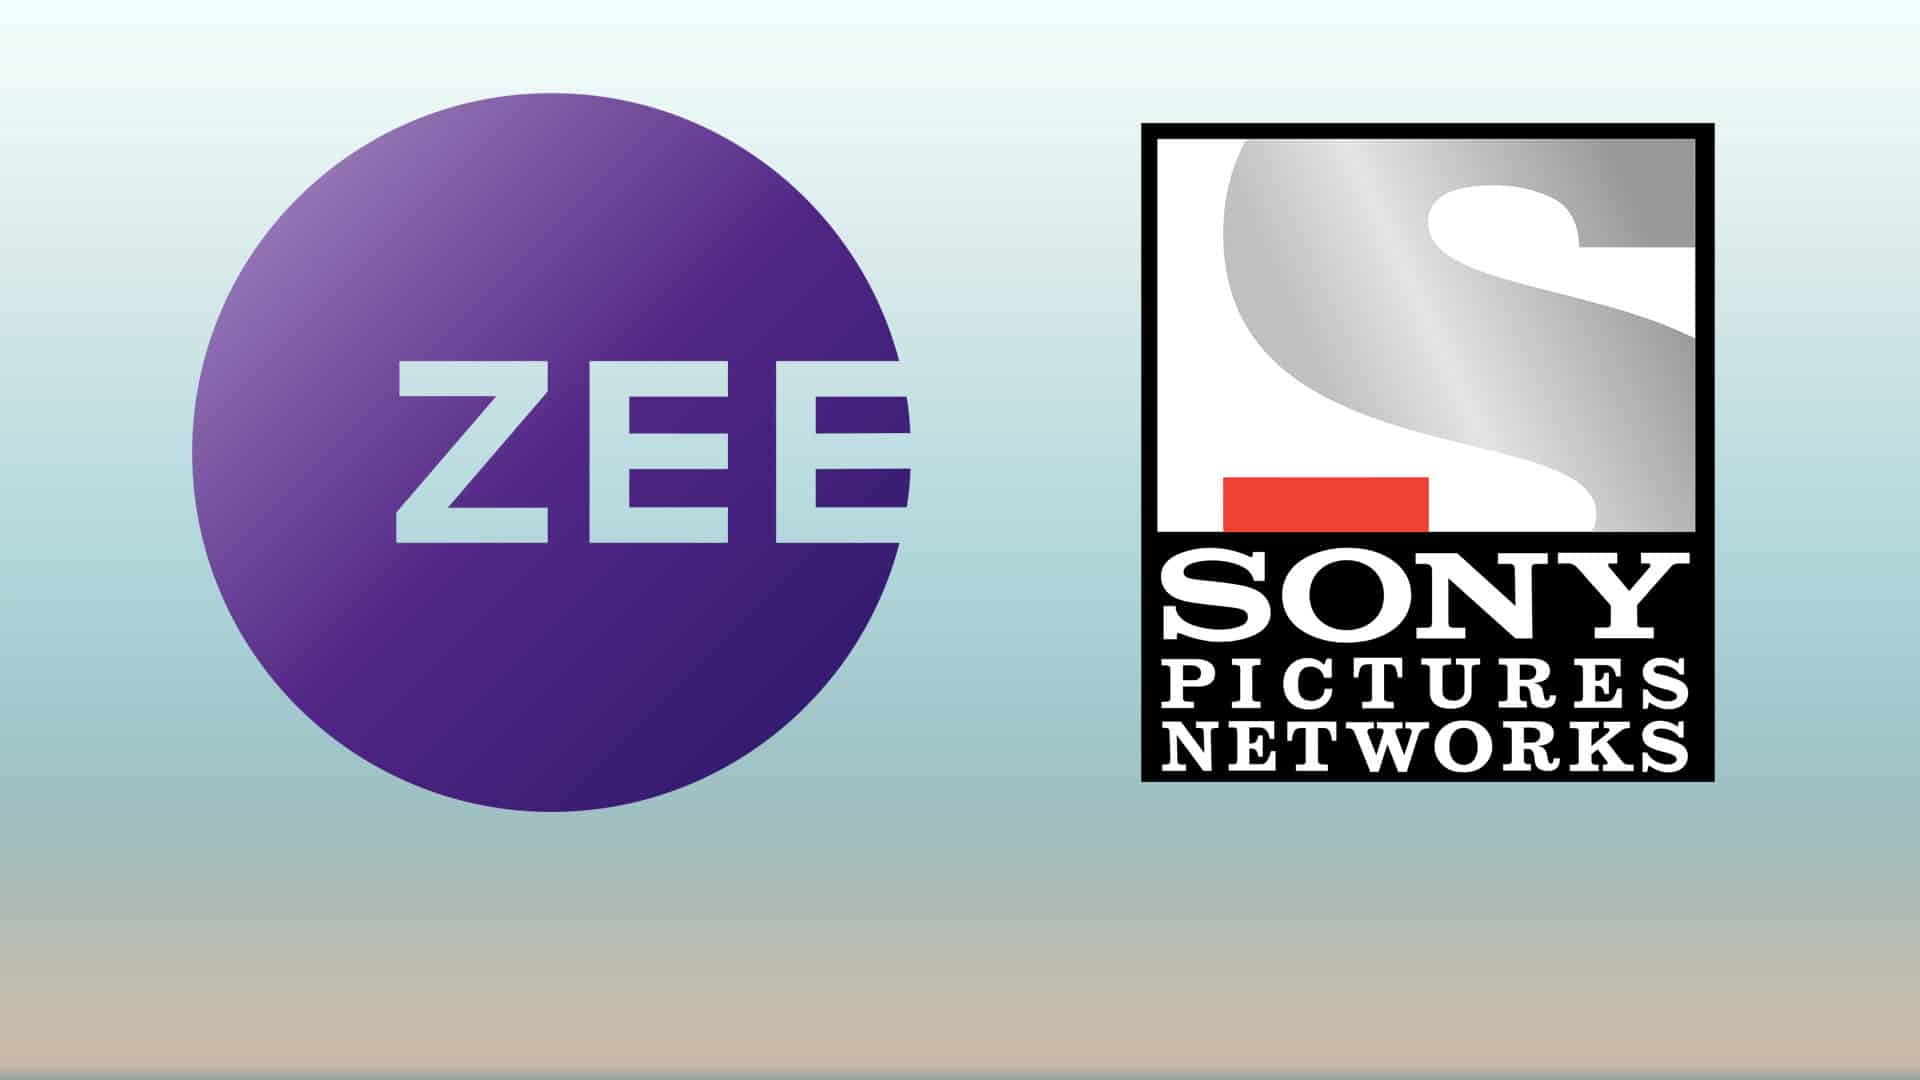 Zee-Sony merger: Groups agree to sell 3 Hindi channels to address anti-competition concerns